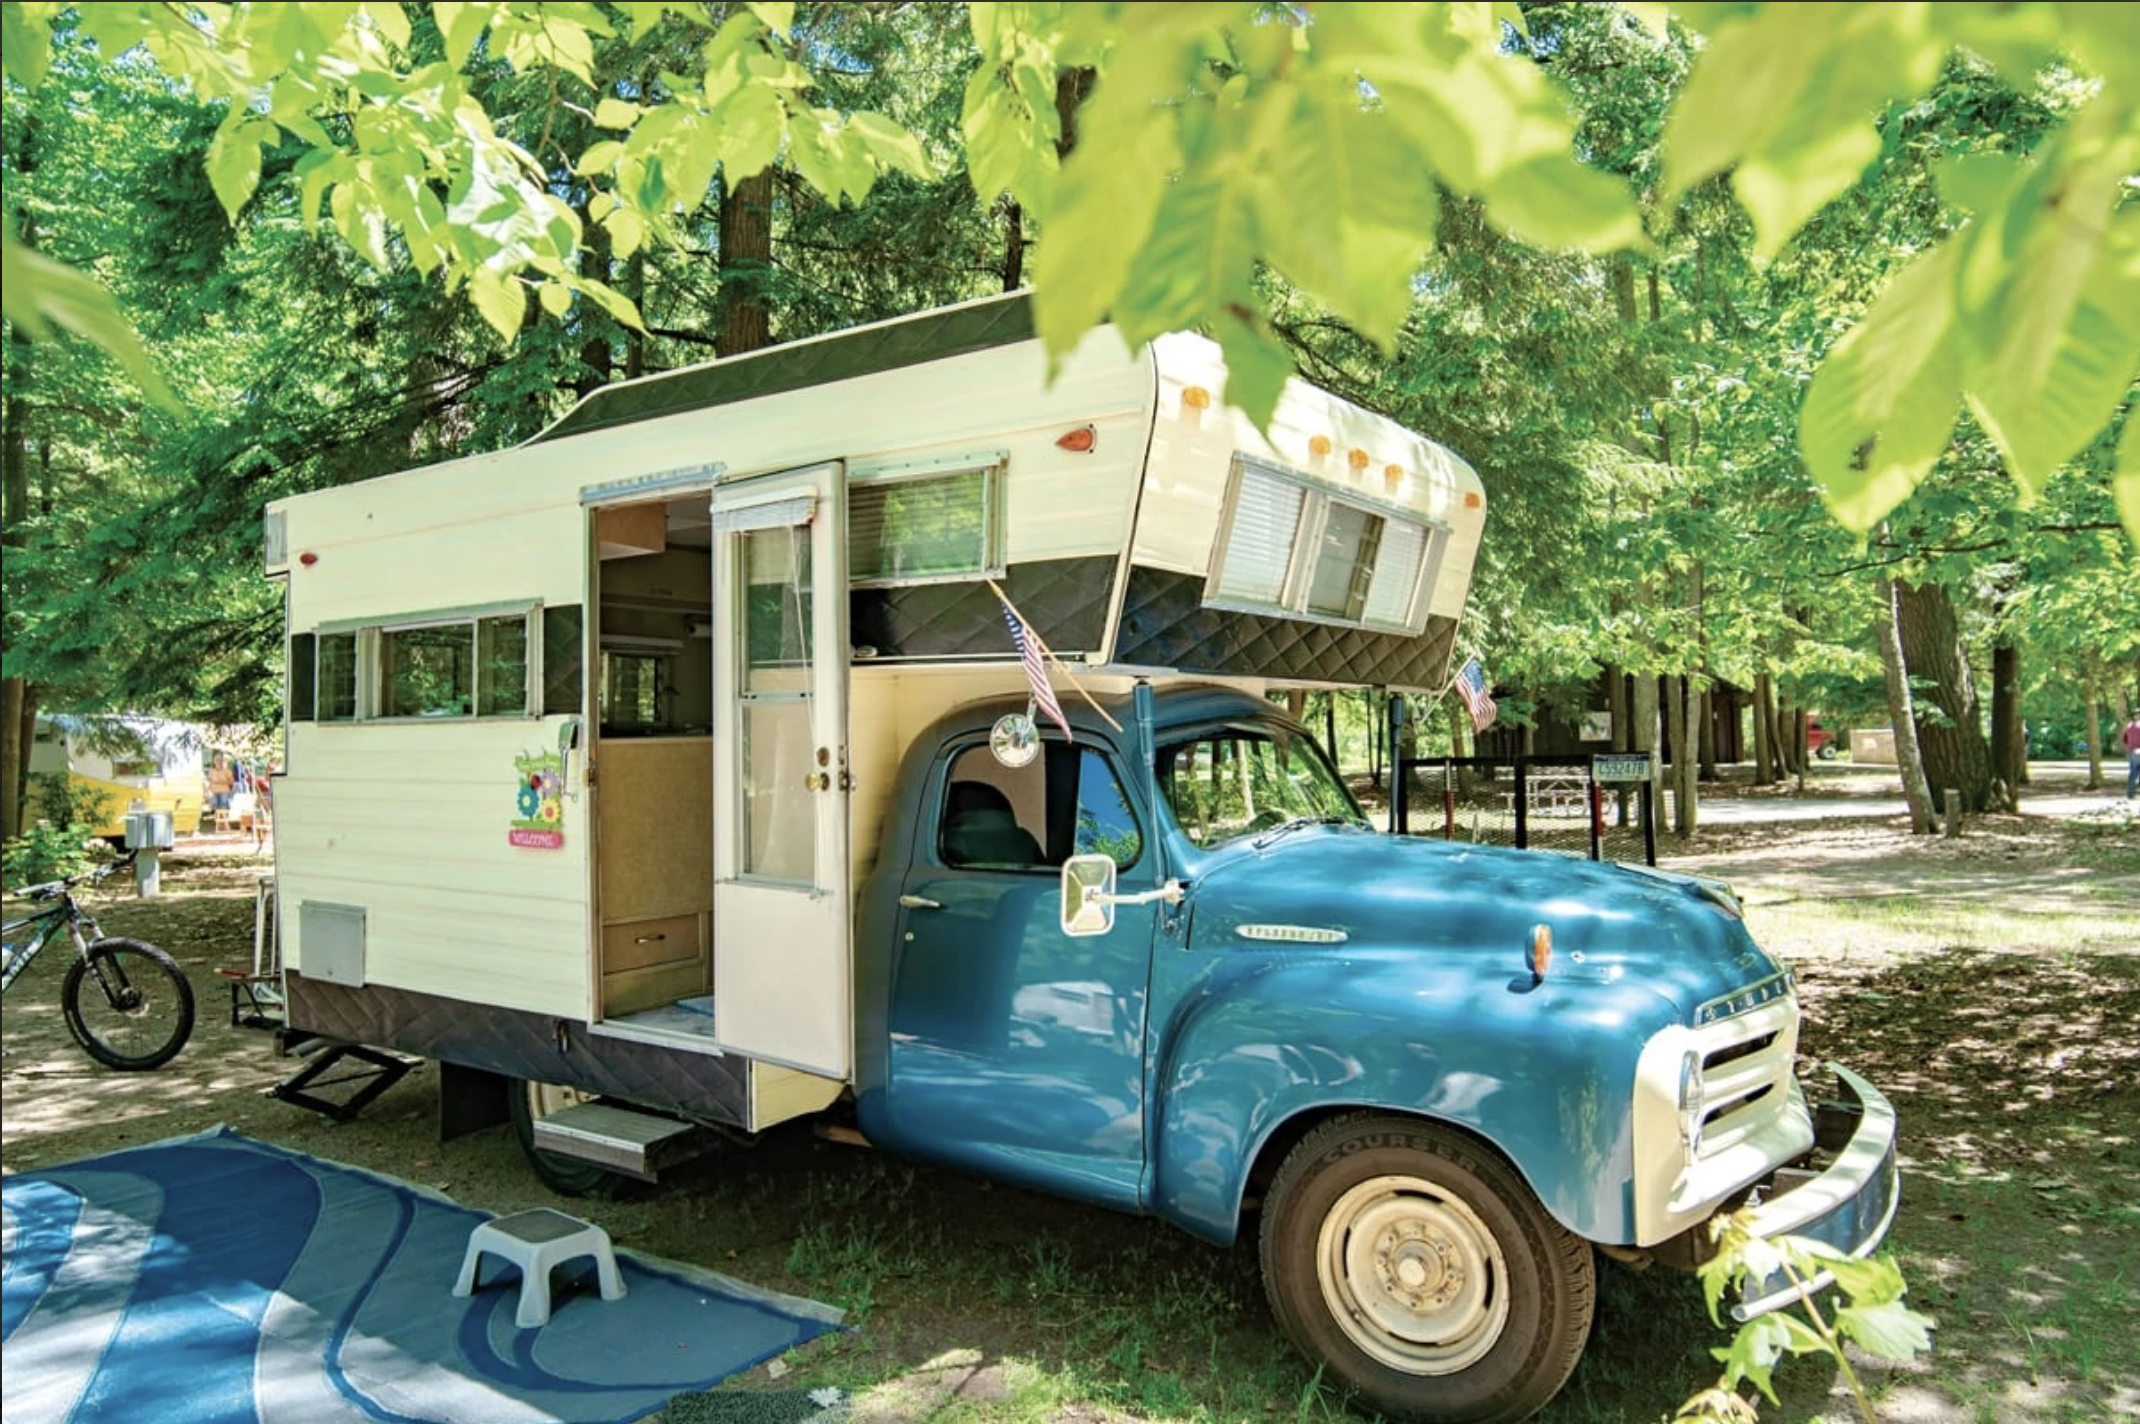 Vintage metal campers of the Tin Can Tourists